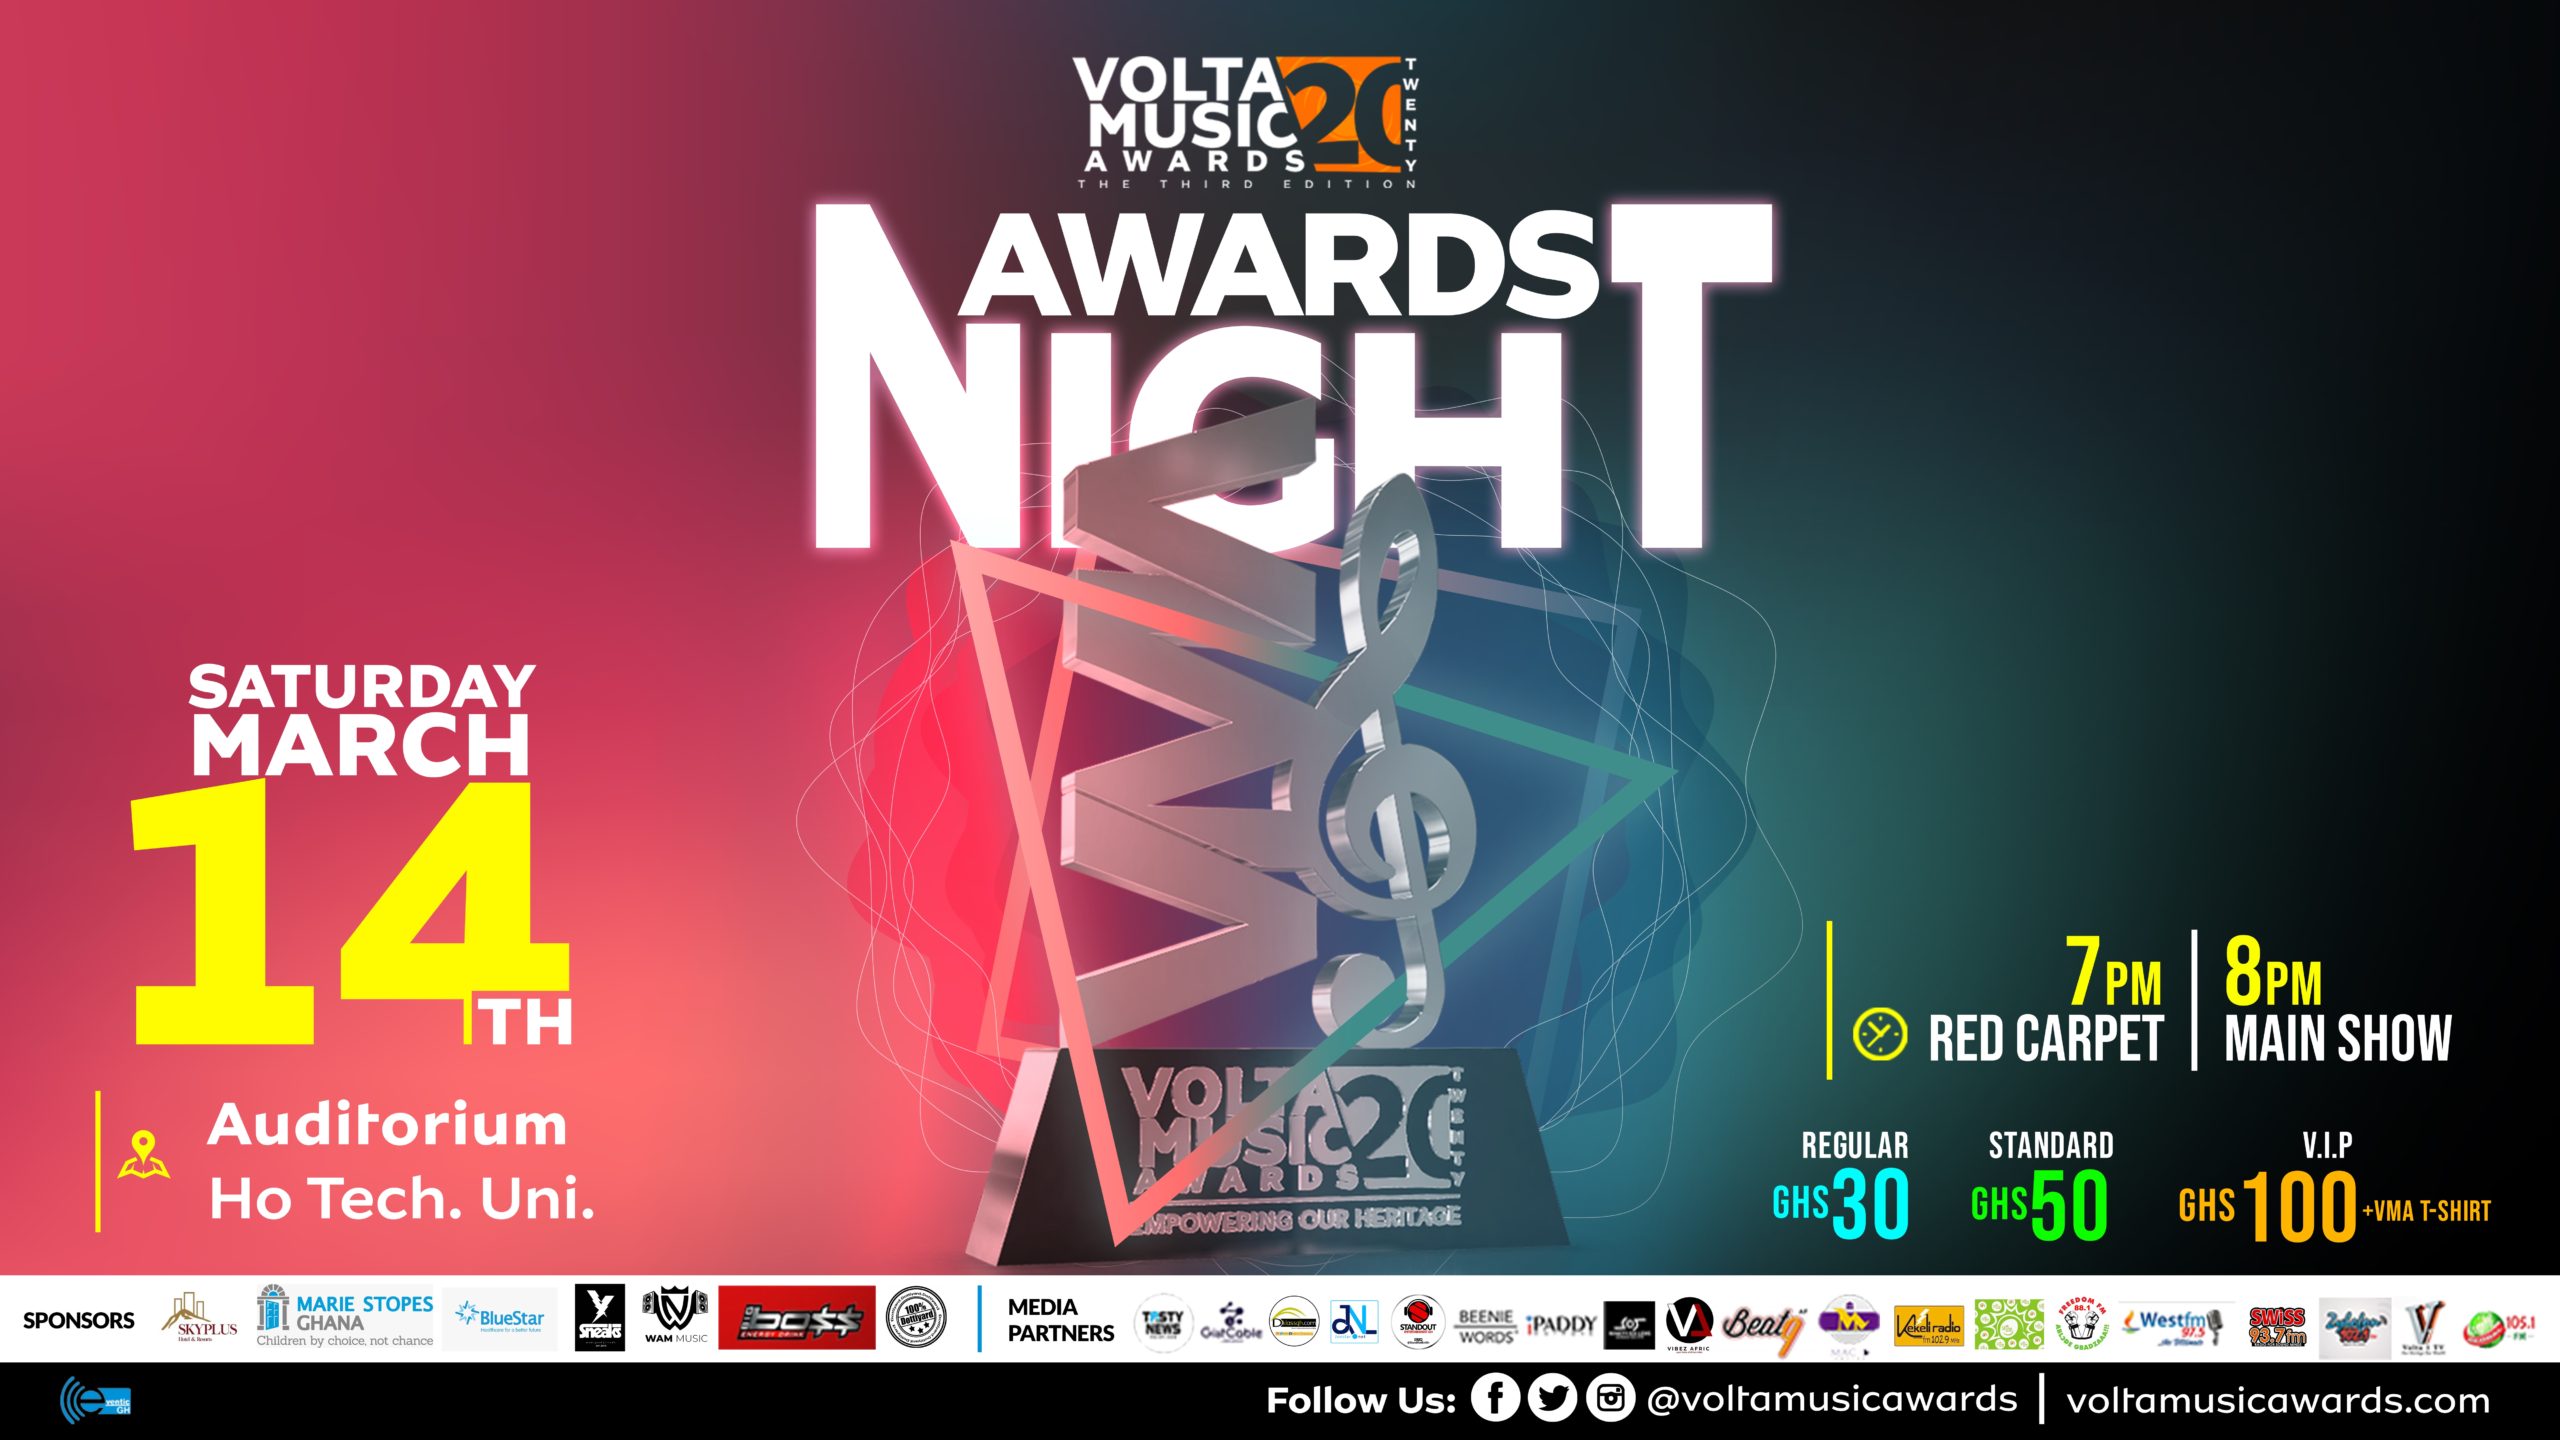 Volta Music Awards 2020 slated for March 14